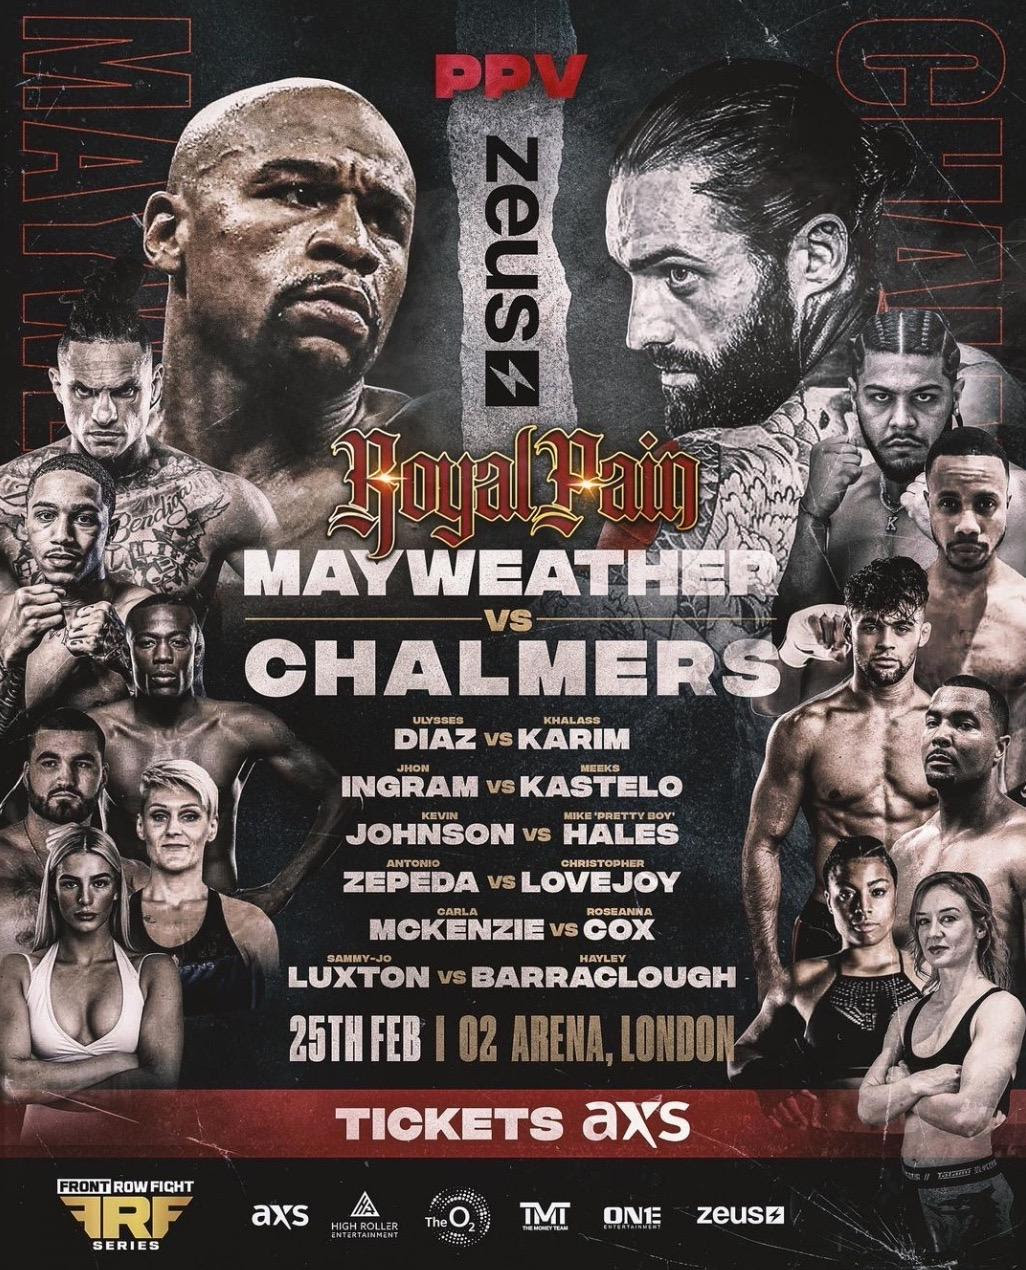 Natalie Nunn and Tommie Lee set to battle on undercard of Mayweather vs Chalmers